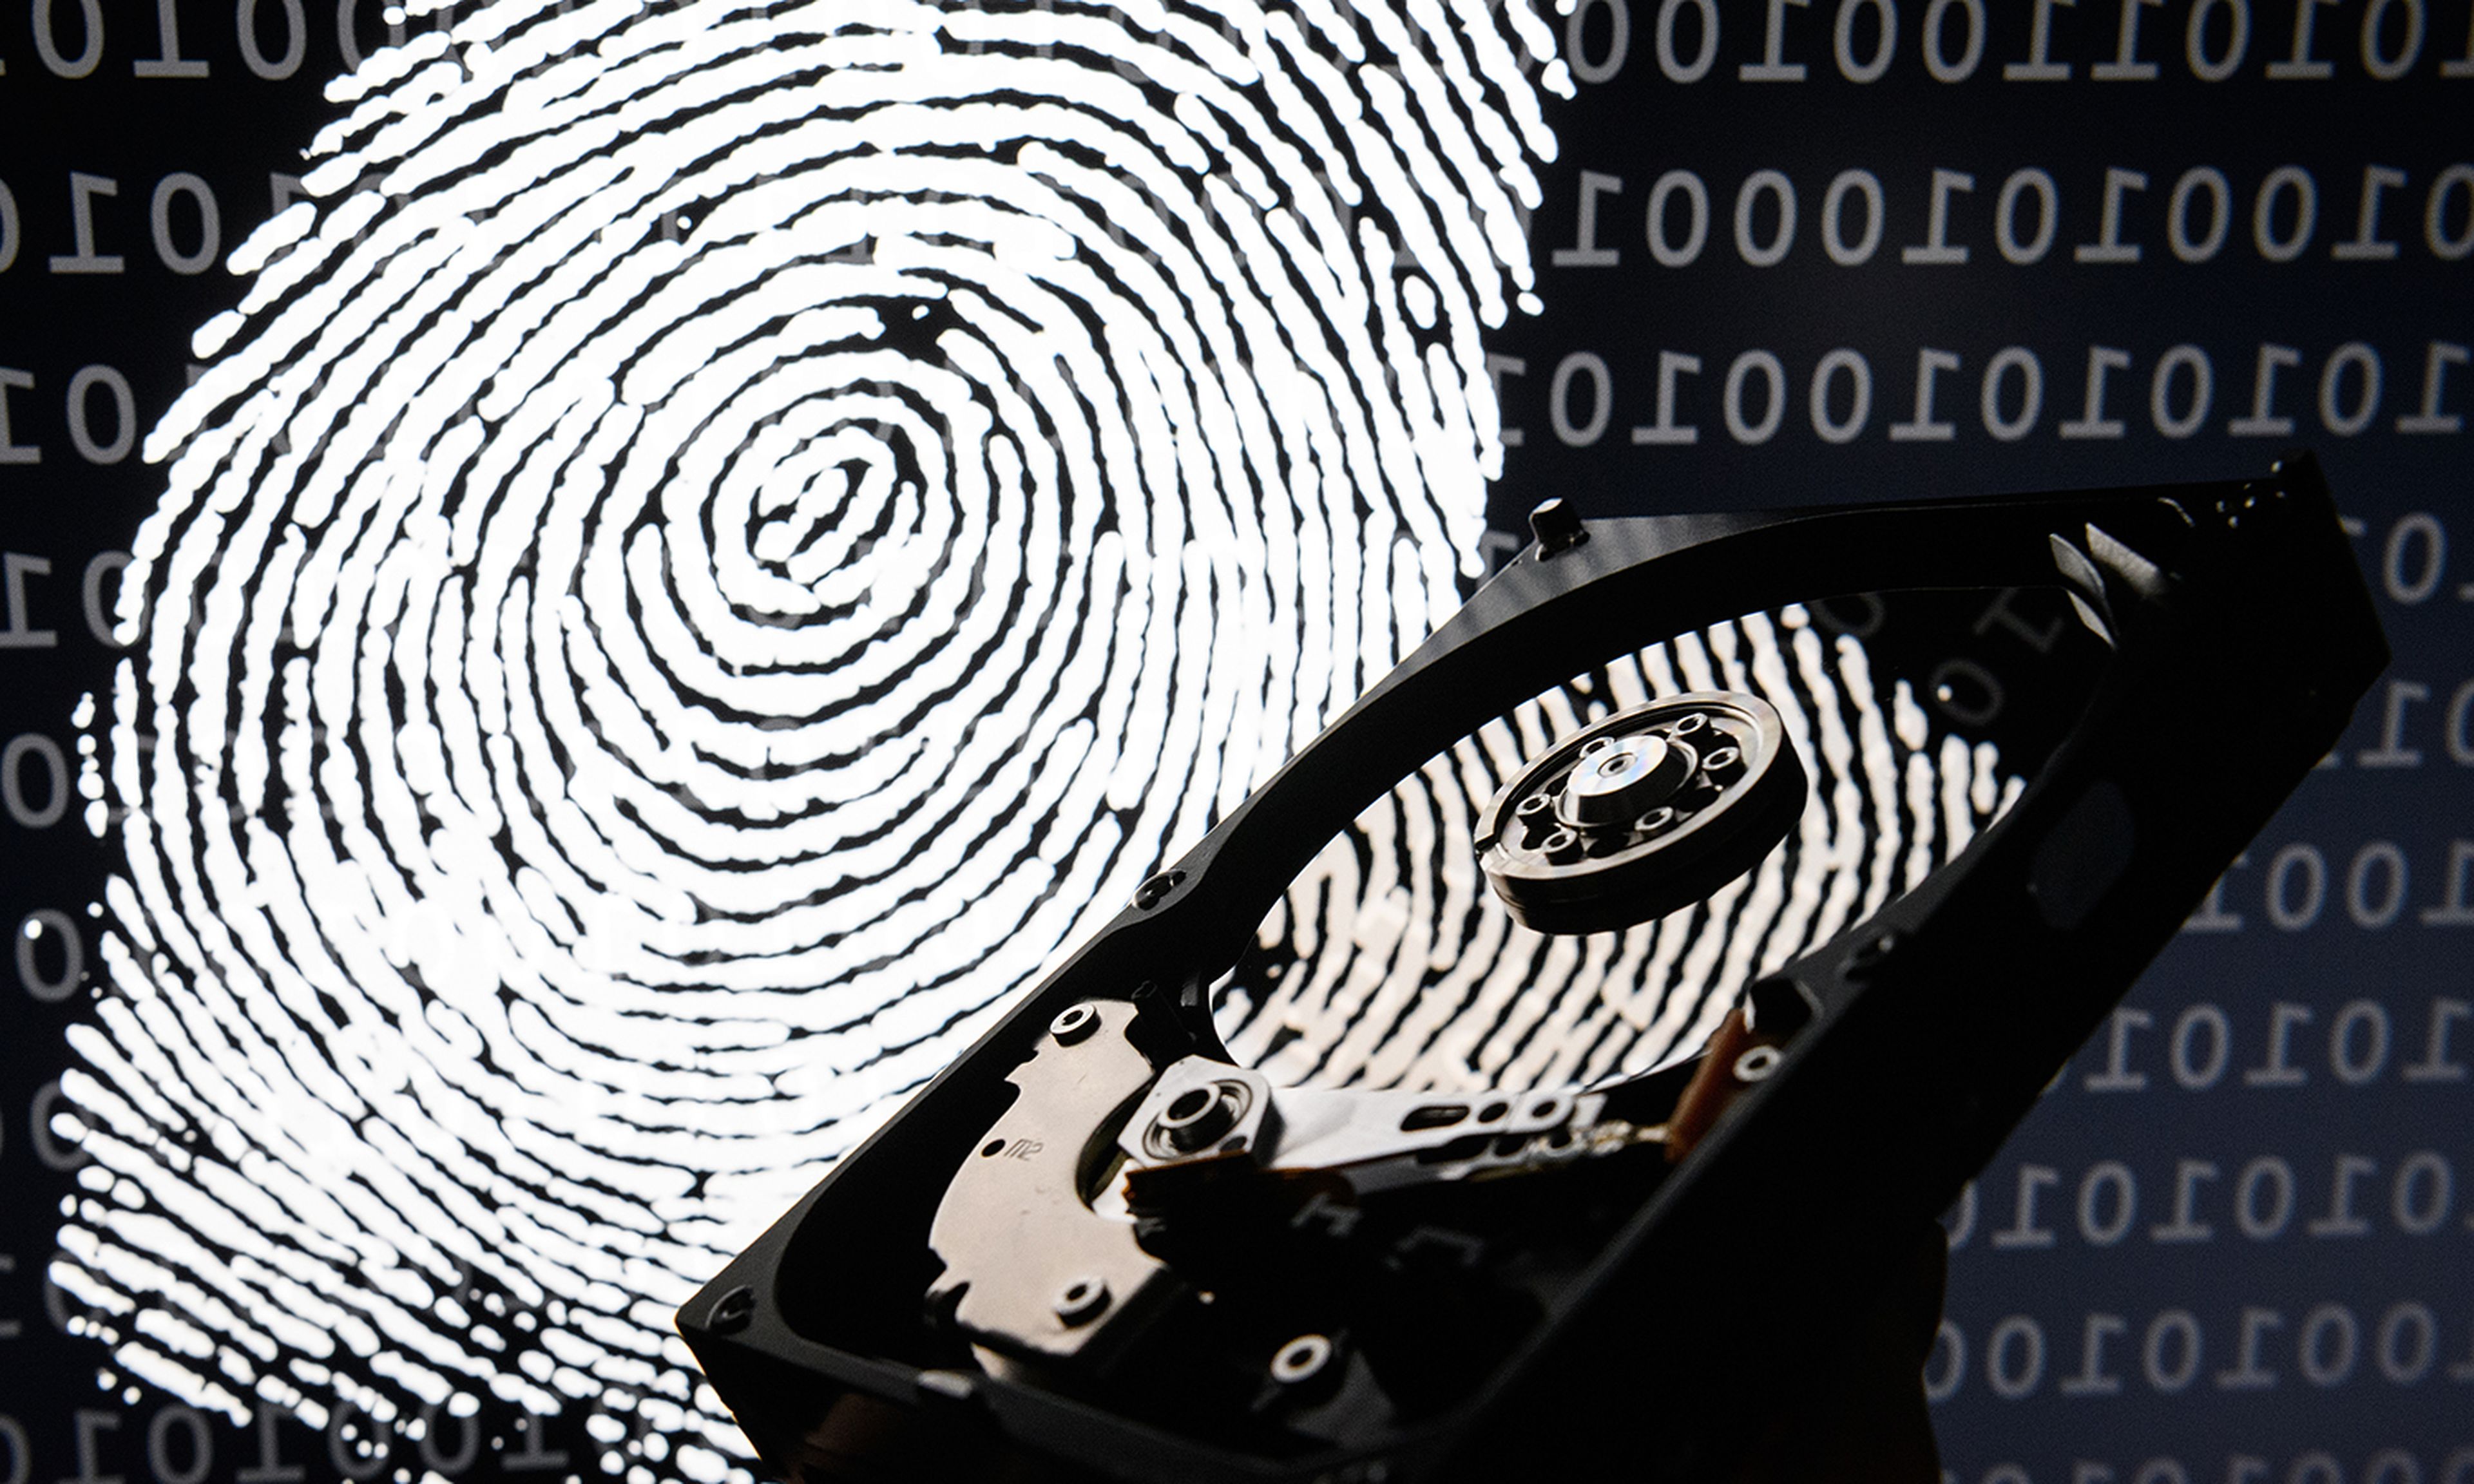 A hard drive is seen in the light of a projection of a thumbprint.